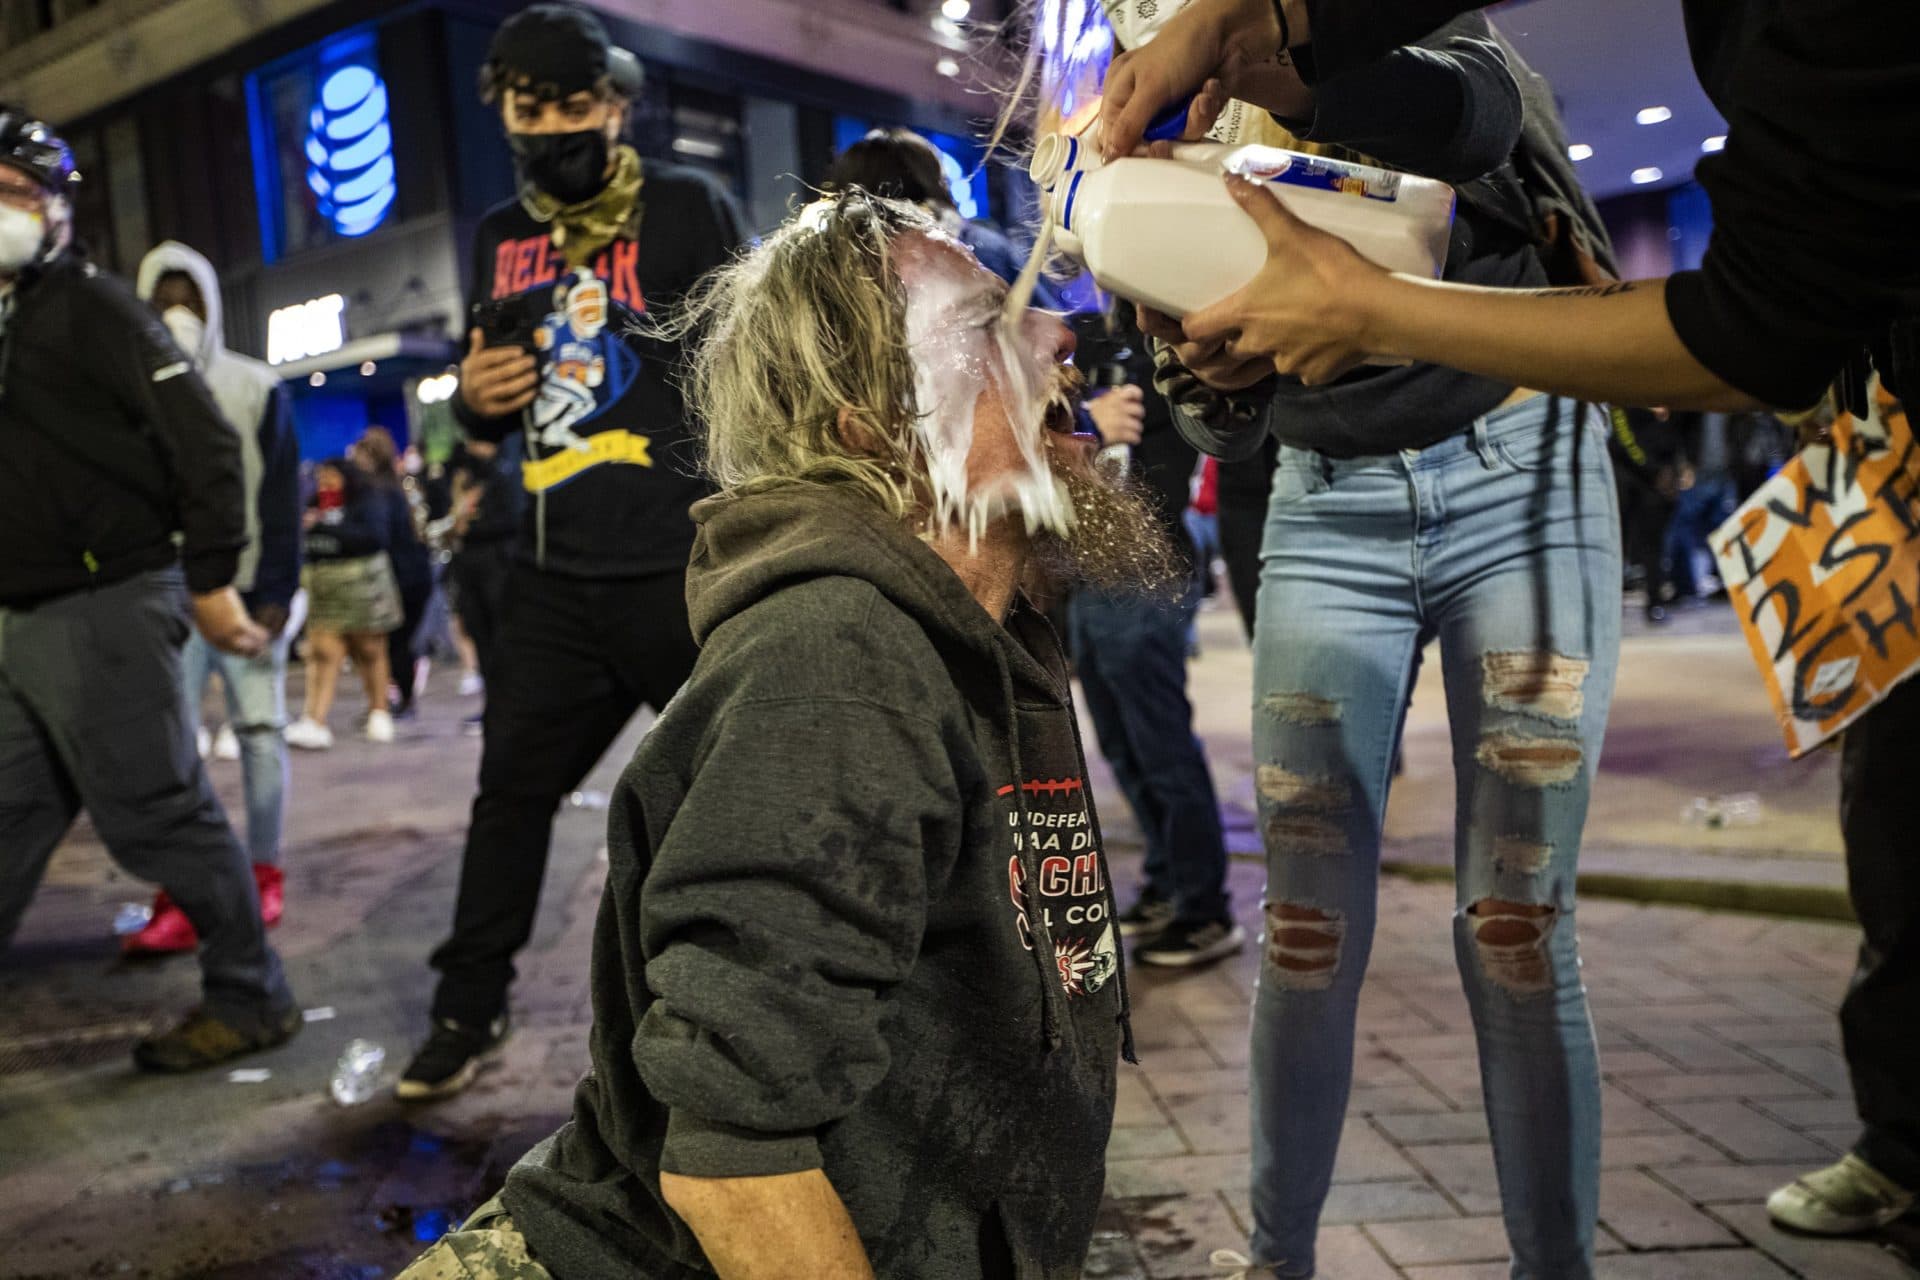 A man gets milk poured on his face after being pepper sprayed by Boston Police in Downtown Crossing. (Jesse Costa./WBUR)